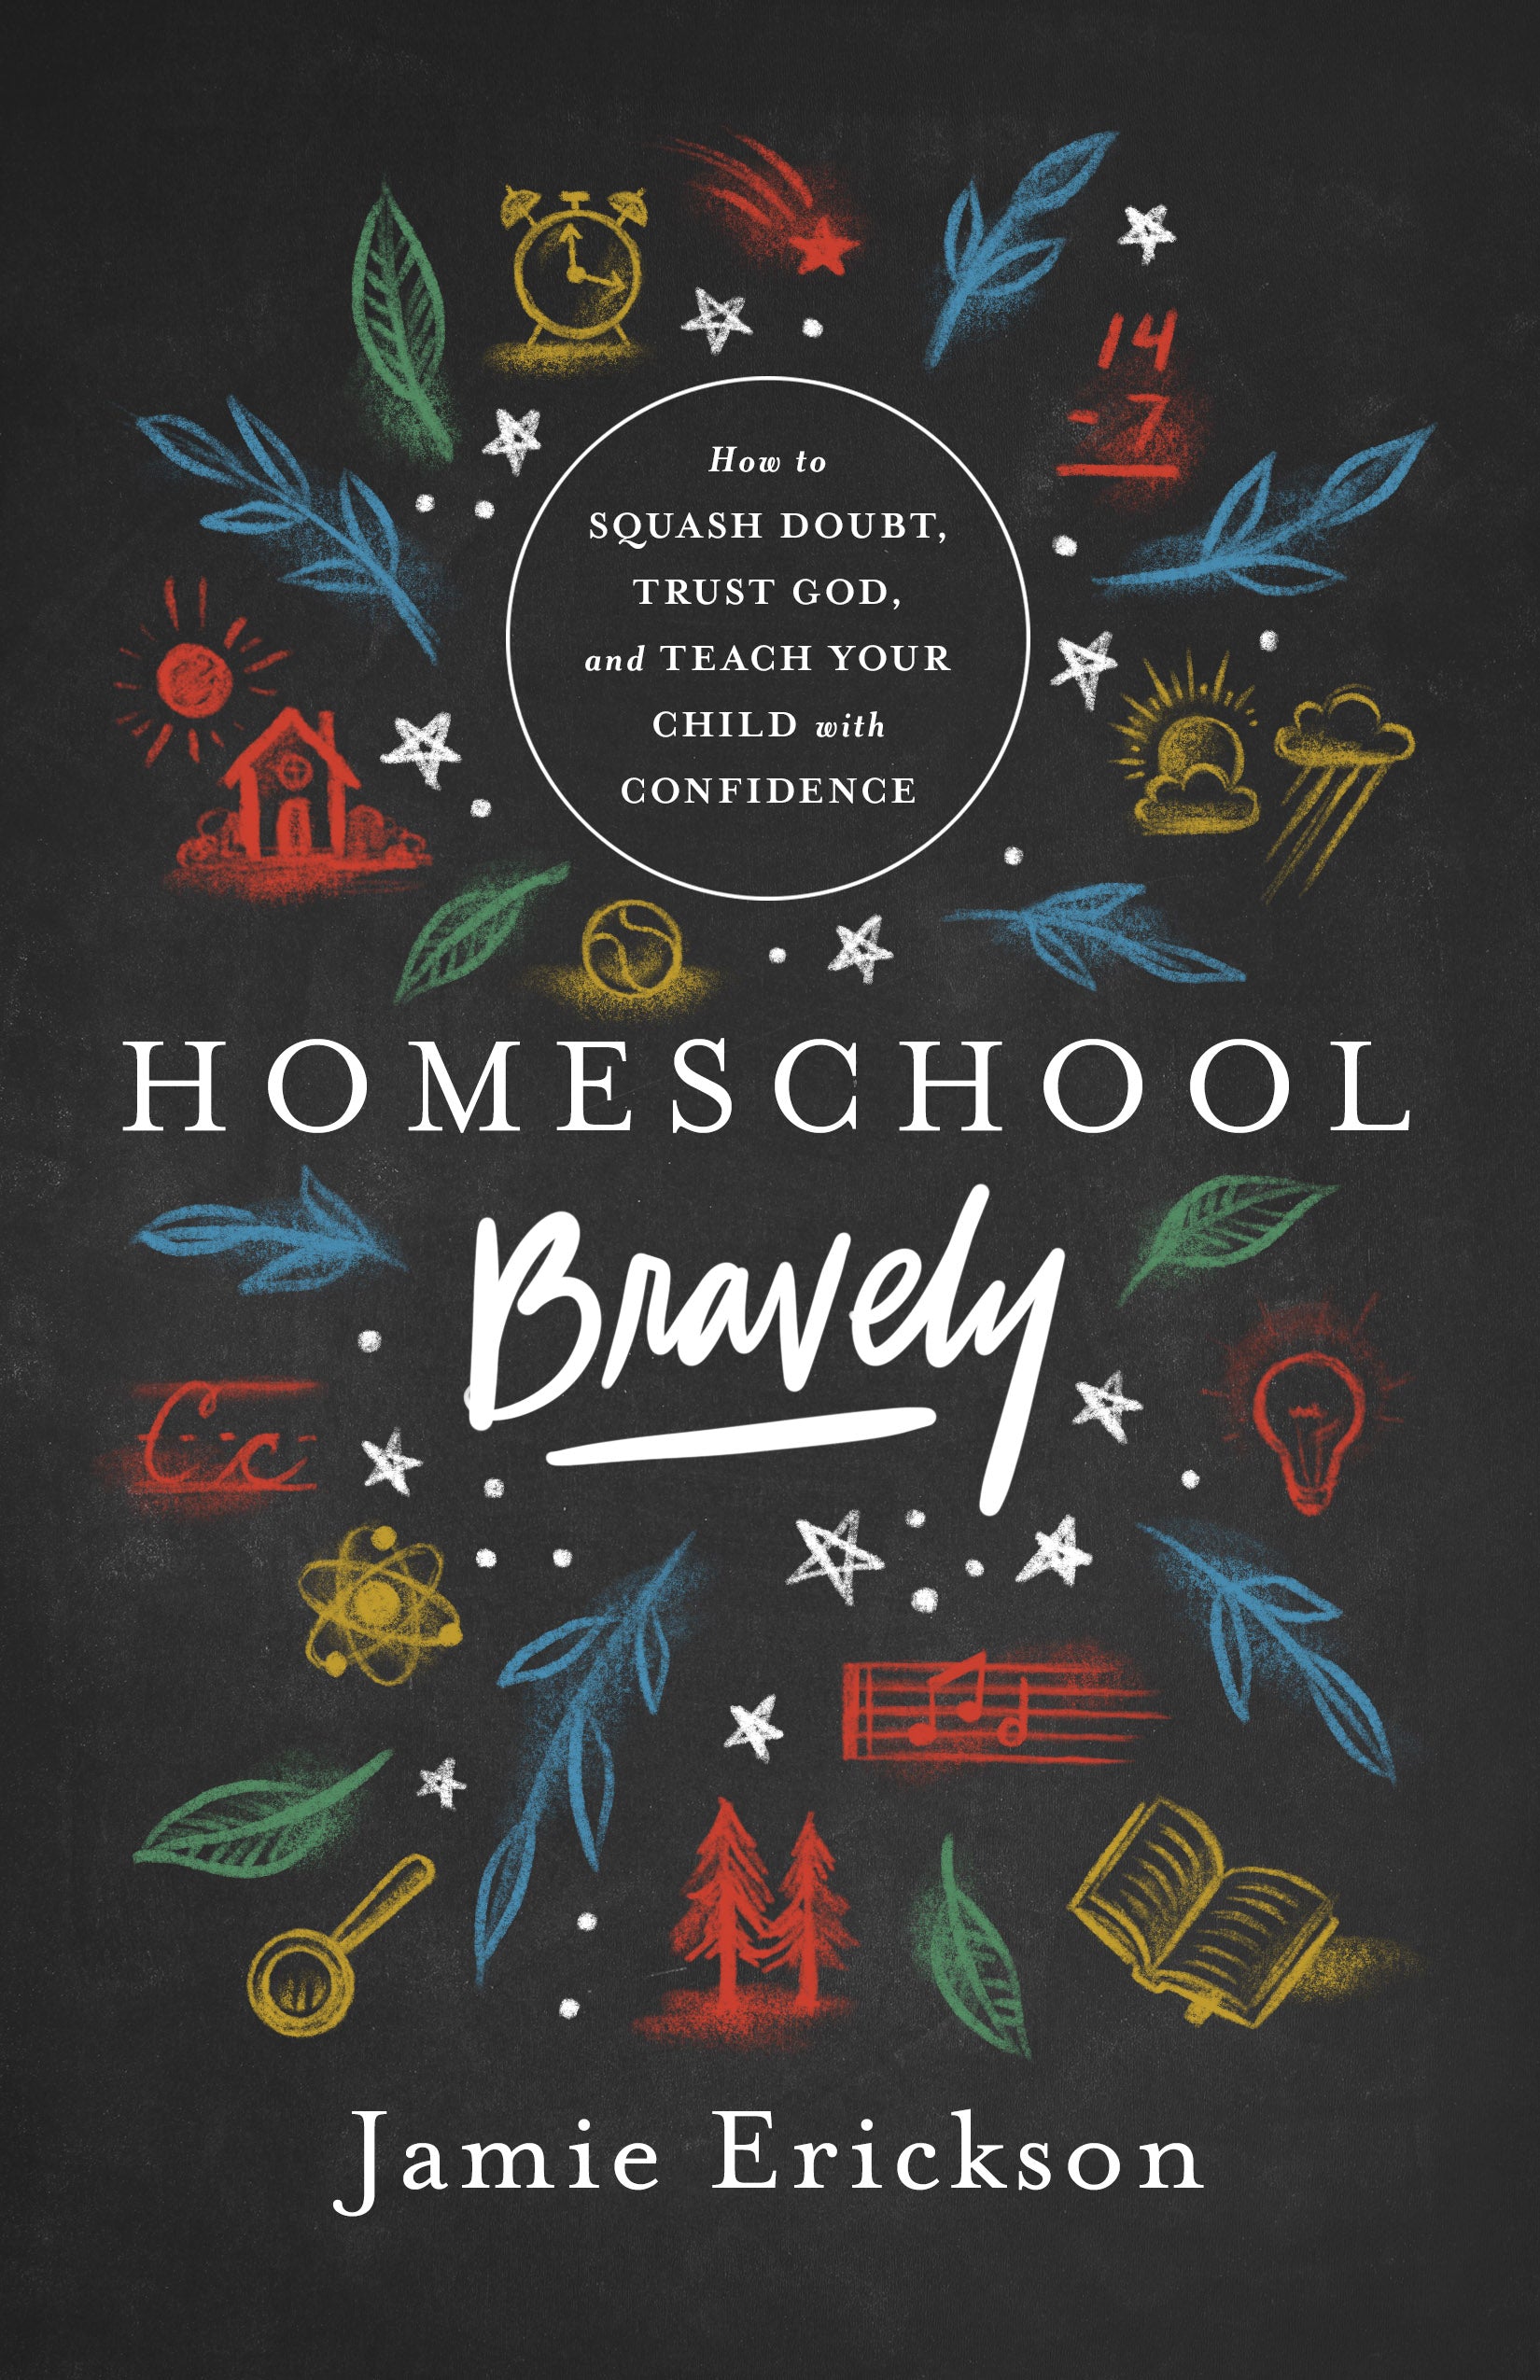 Image of Homeschool Bravely other